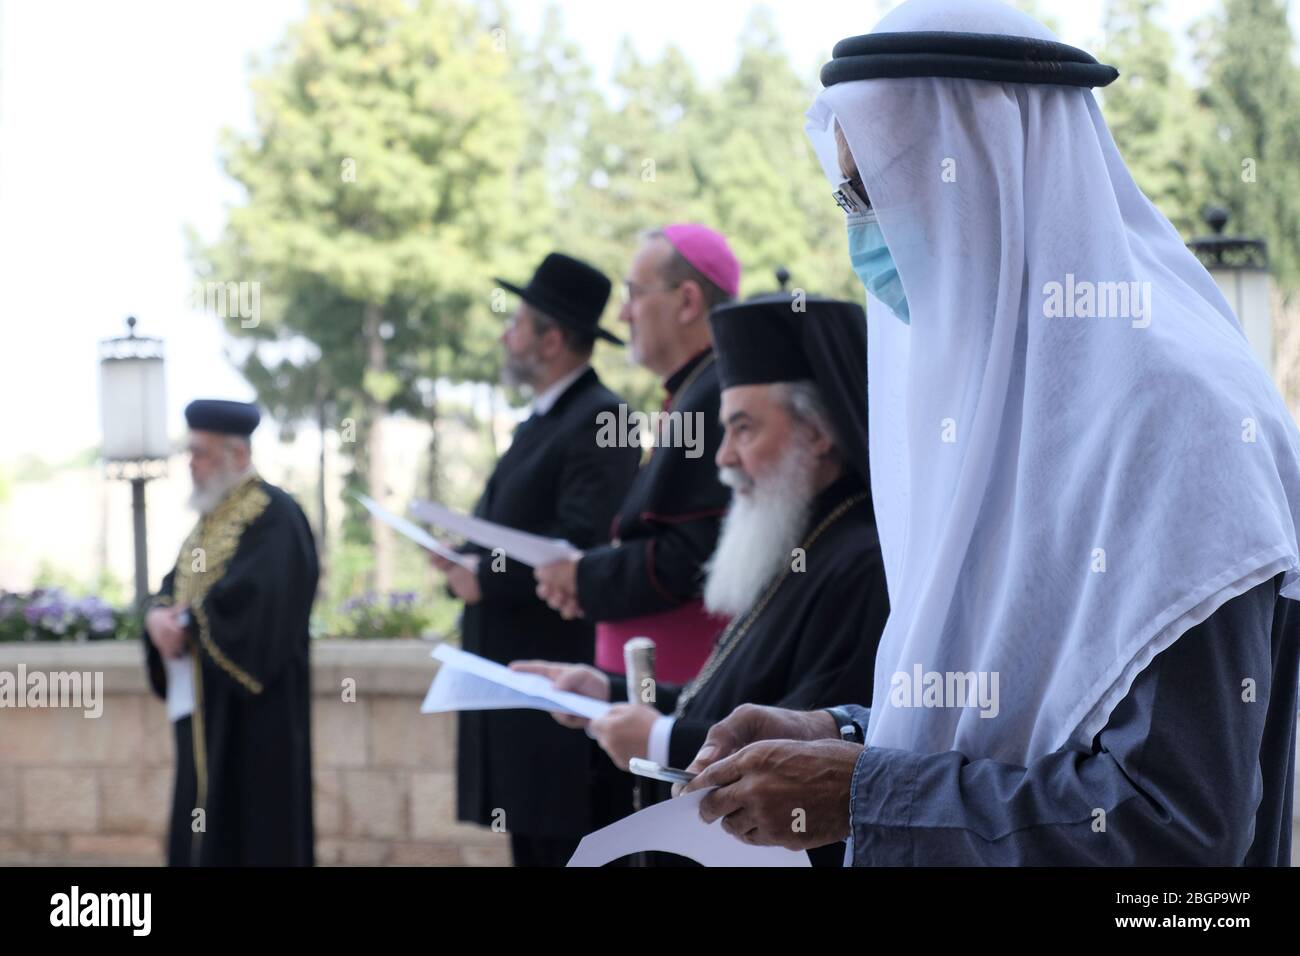 Jerusalem, Israel. 22nd Apr, 2020. Jewish, Christian, Muslim and Druze religious leaders hold an interfaith prayer for the victims and protection from COVID-19 coronavirus pandemic in Jerusalem, Israel. Stock Photo